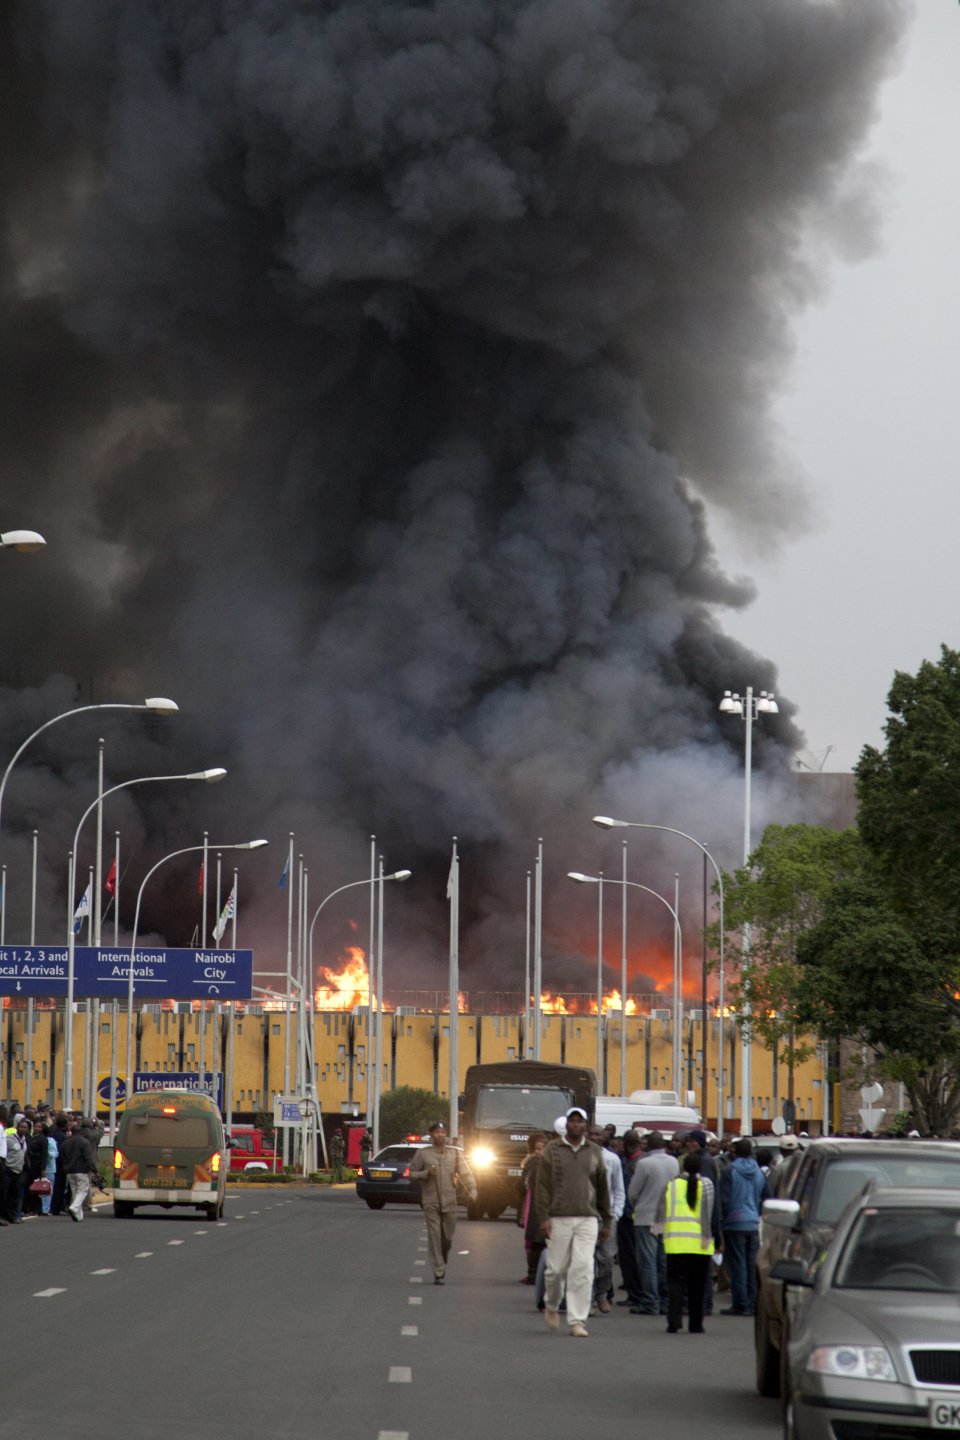 Black smoke billows from the Jomo Kenyatta International Airport in Nairobi, Kenya Wednesday, Aug. 7, 2013. The Kenya Airports Authority said the Kenya's main international airport has been closed until further notice so that emergency teams can battle the fire. (AP Photo/Sayyid Azim)